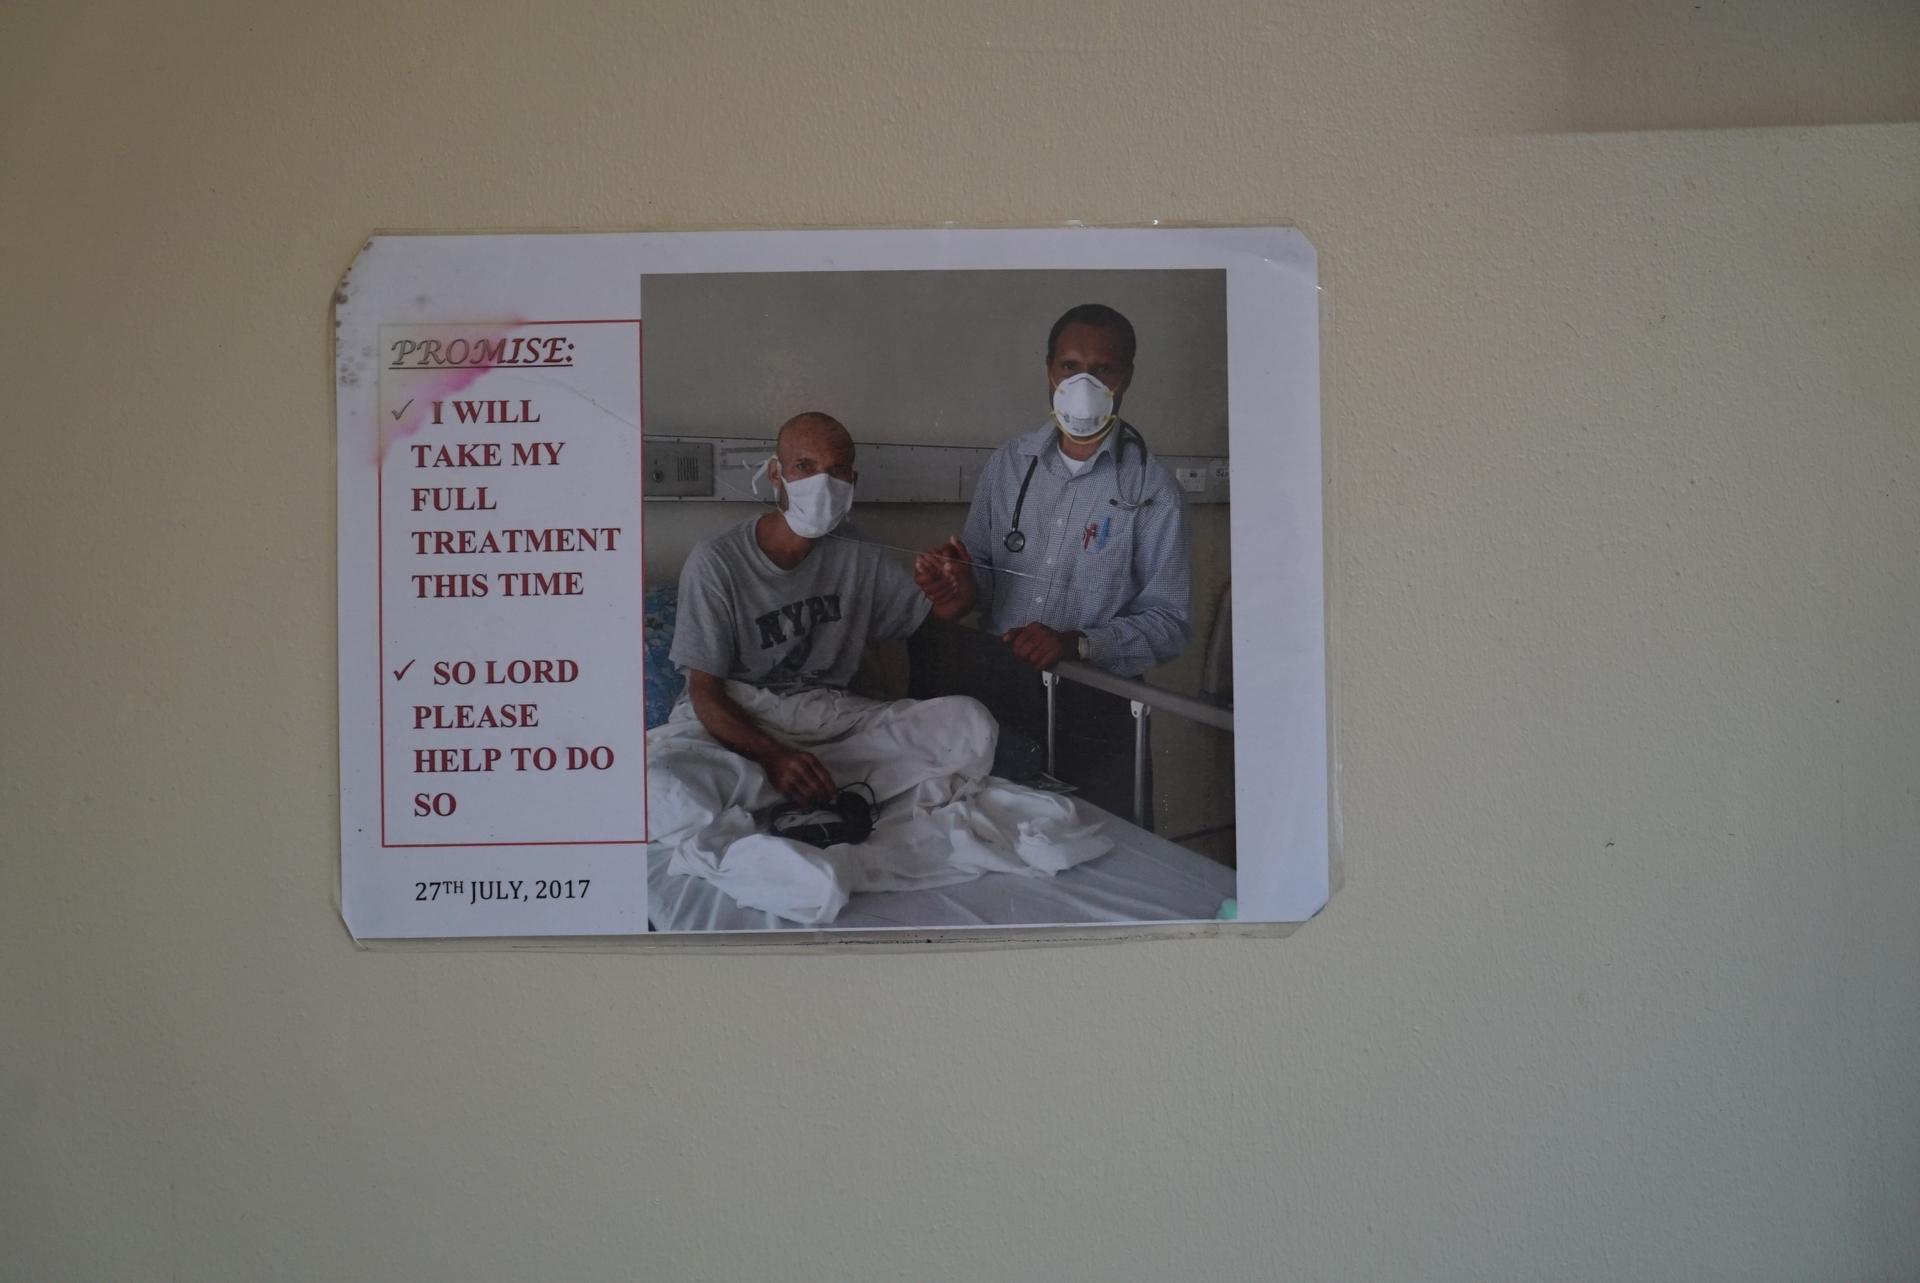 An image of a TB patient and his doctor hung on a wall 